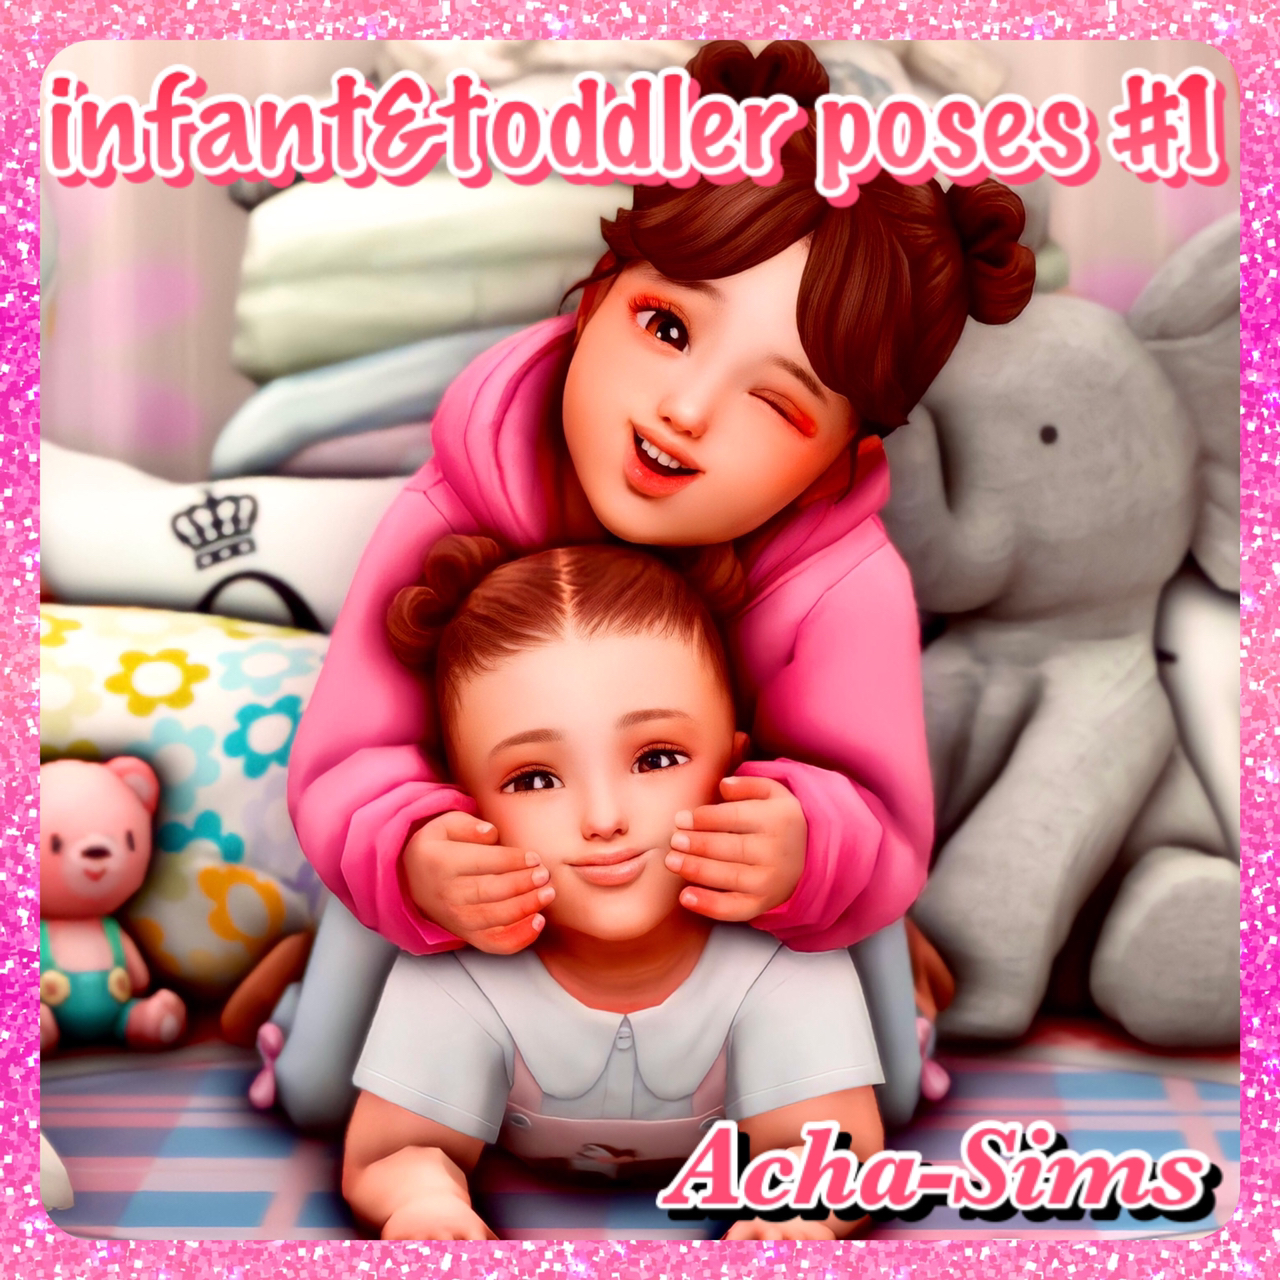 Acha infant & toddler poses #1 project avatar